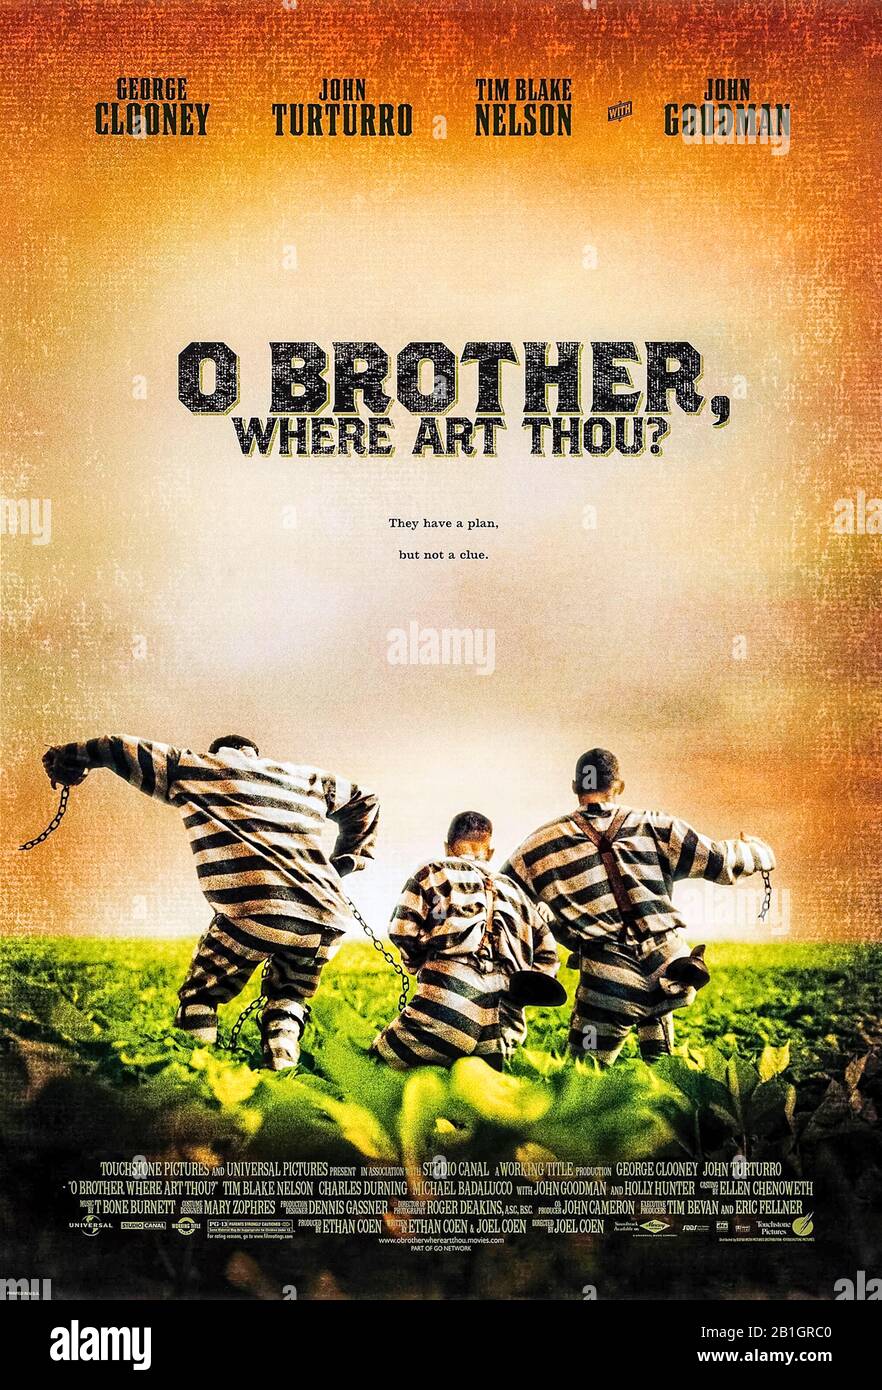 O Brother, Where Art Thou? (2000) directed by Joel Coen and Ethan Coen and starring George Clooney, John Turturro, Tim Blake Nelson and John Goodman. Three convicts escape a chain gang and make a series of strange encounters whilst on the run; loosely based on The Odyssey by Homer. Stock Photo